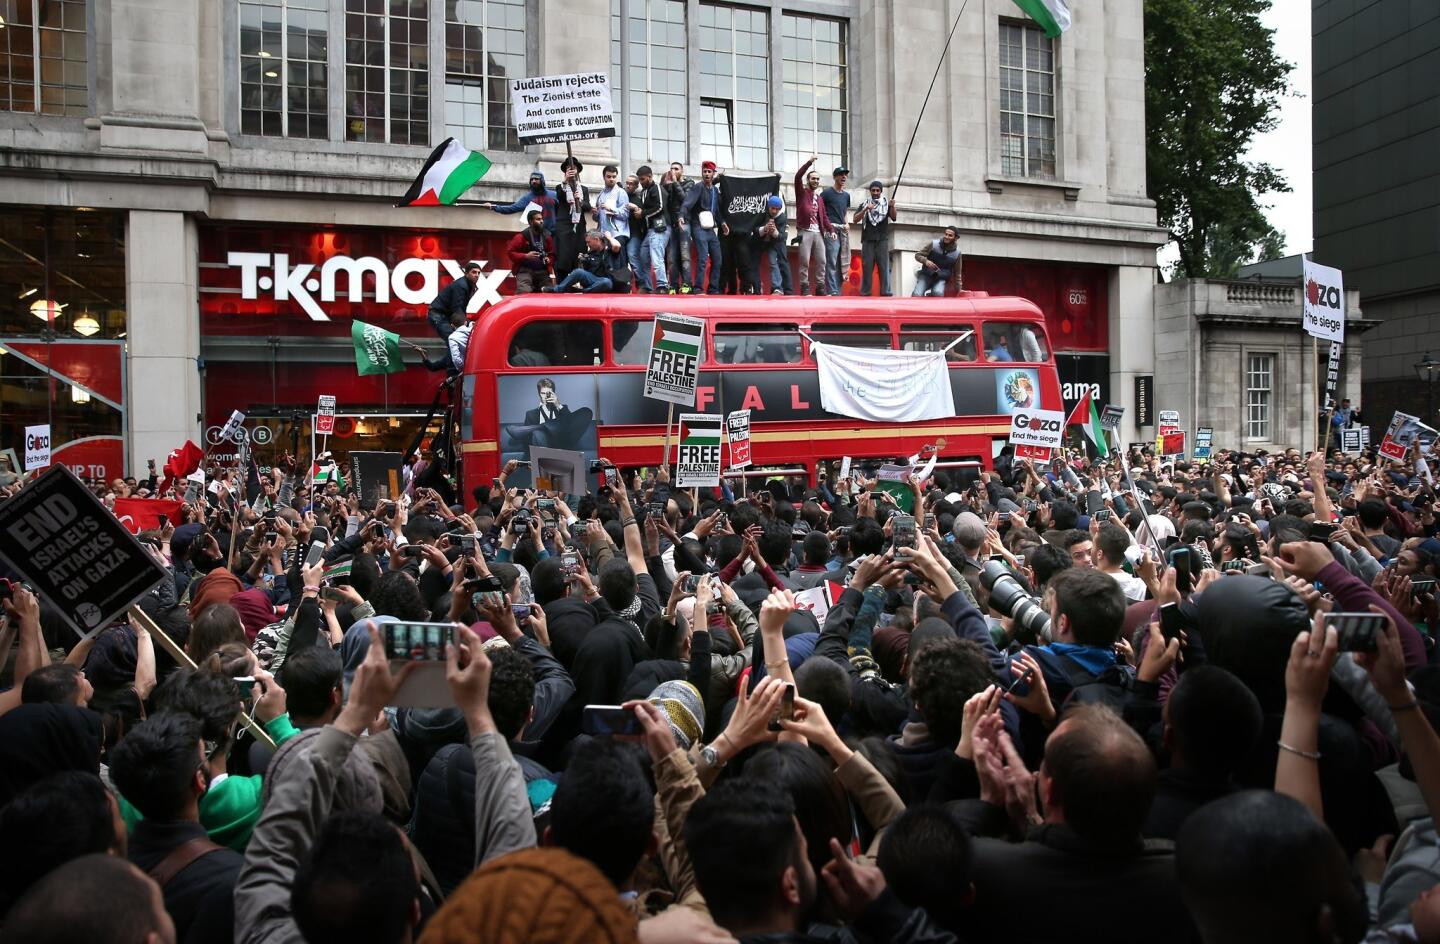 Pro-Palestinian demonstrators occupy a London bus and fill the street outside the Israeli Embassy in London on July 11.